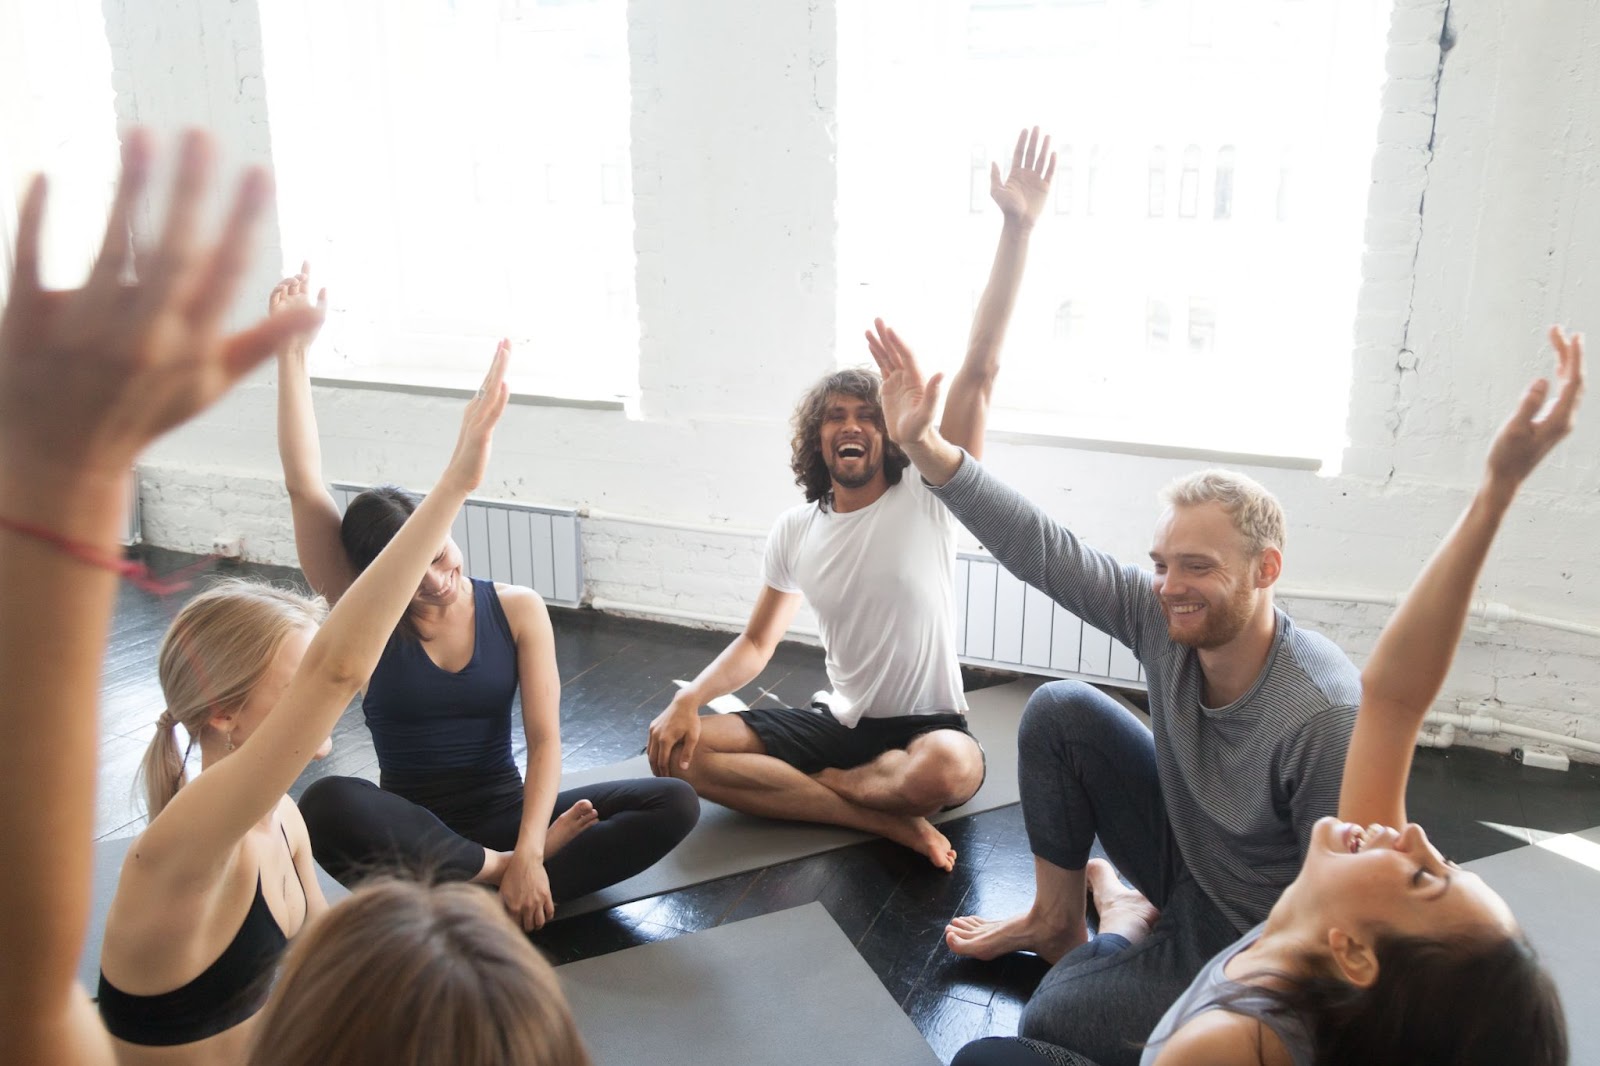 A group of men and women laughing with their hands up during a yoga class.